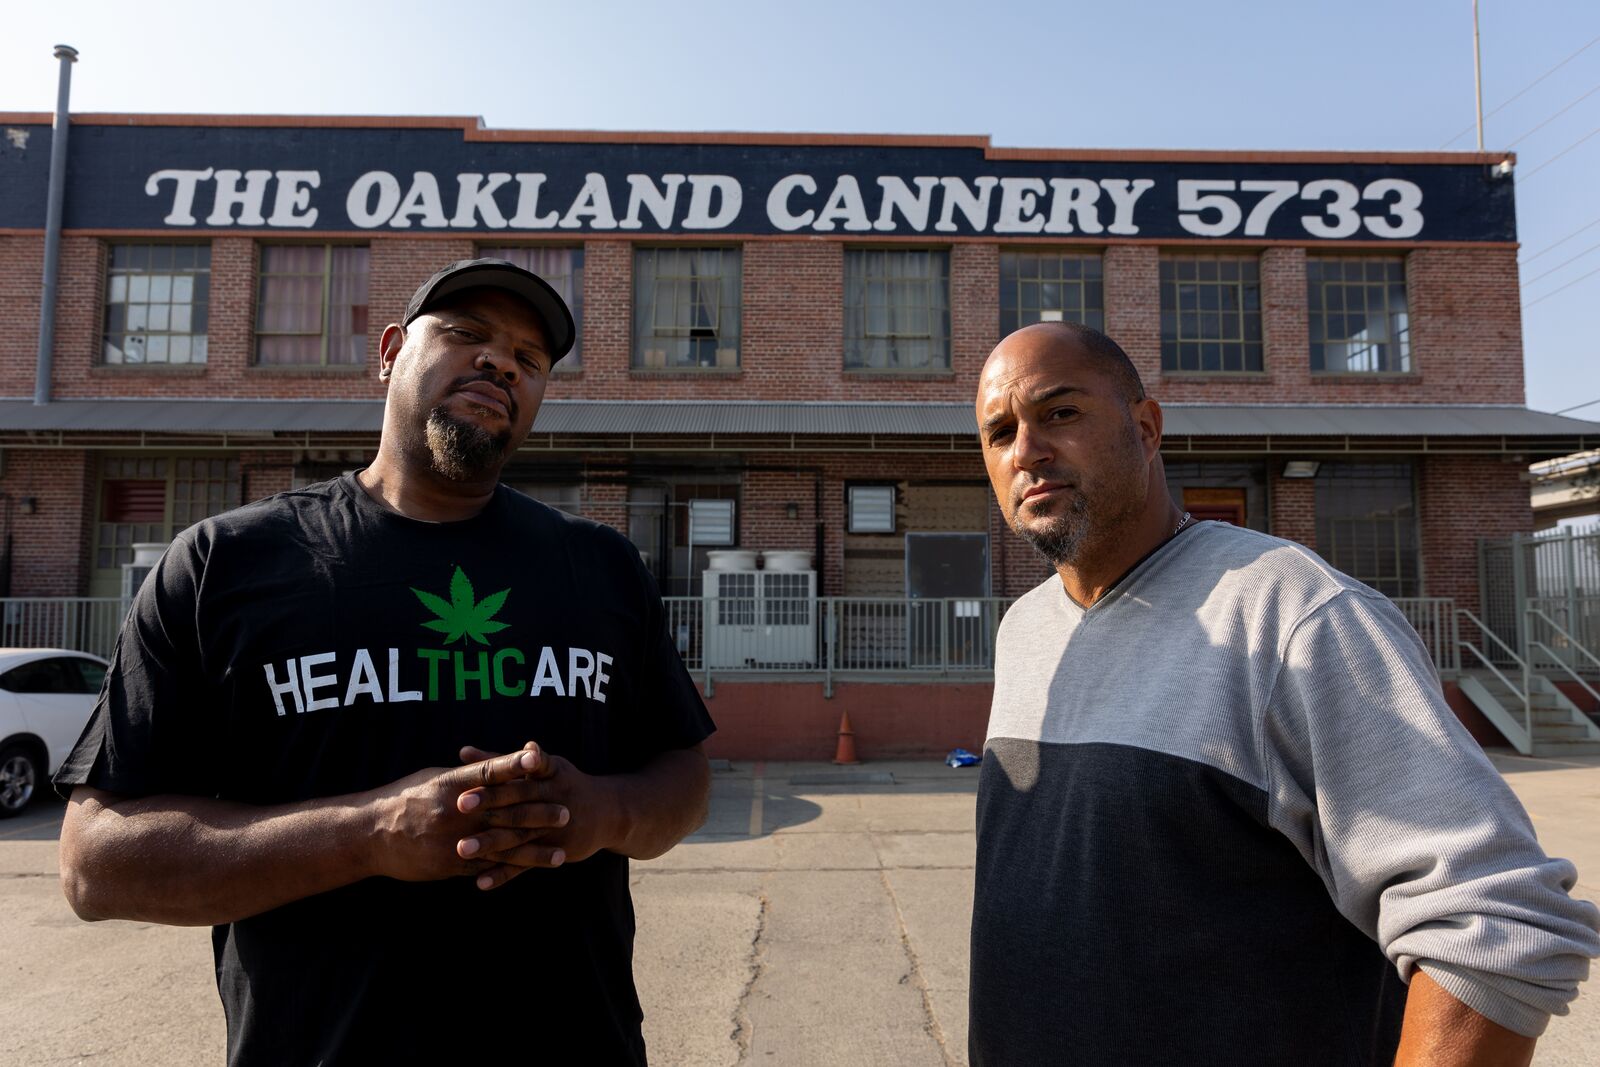 Two middle-aged Black men, one in a tshirt that says "Healthcare" with a marijuana leaf, stand stoically in front of the Cannery warehouse building.